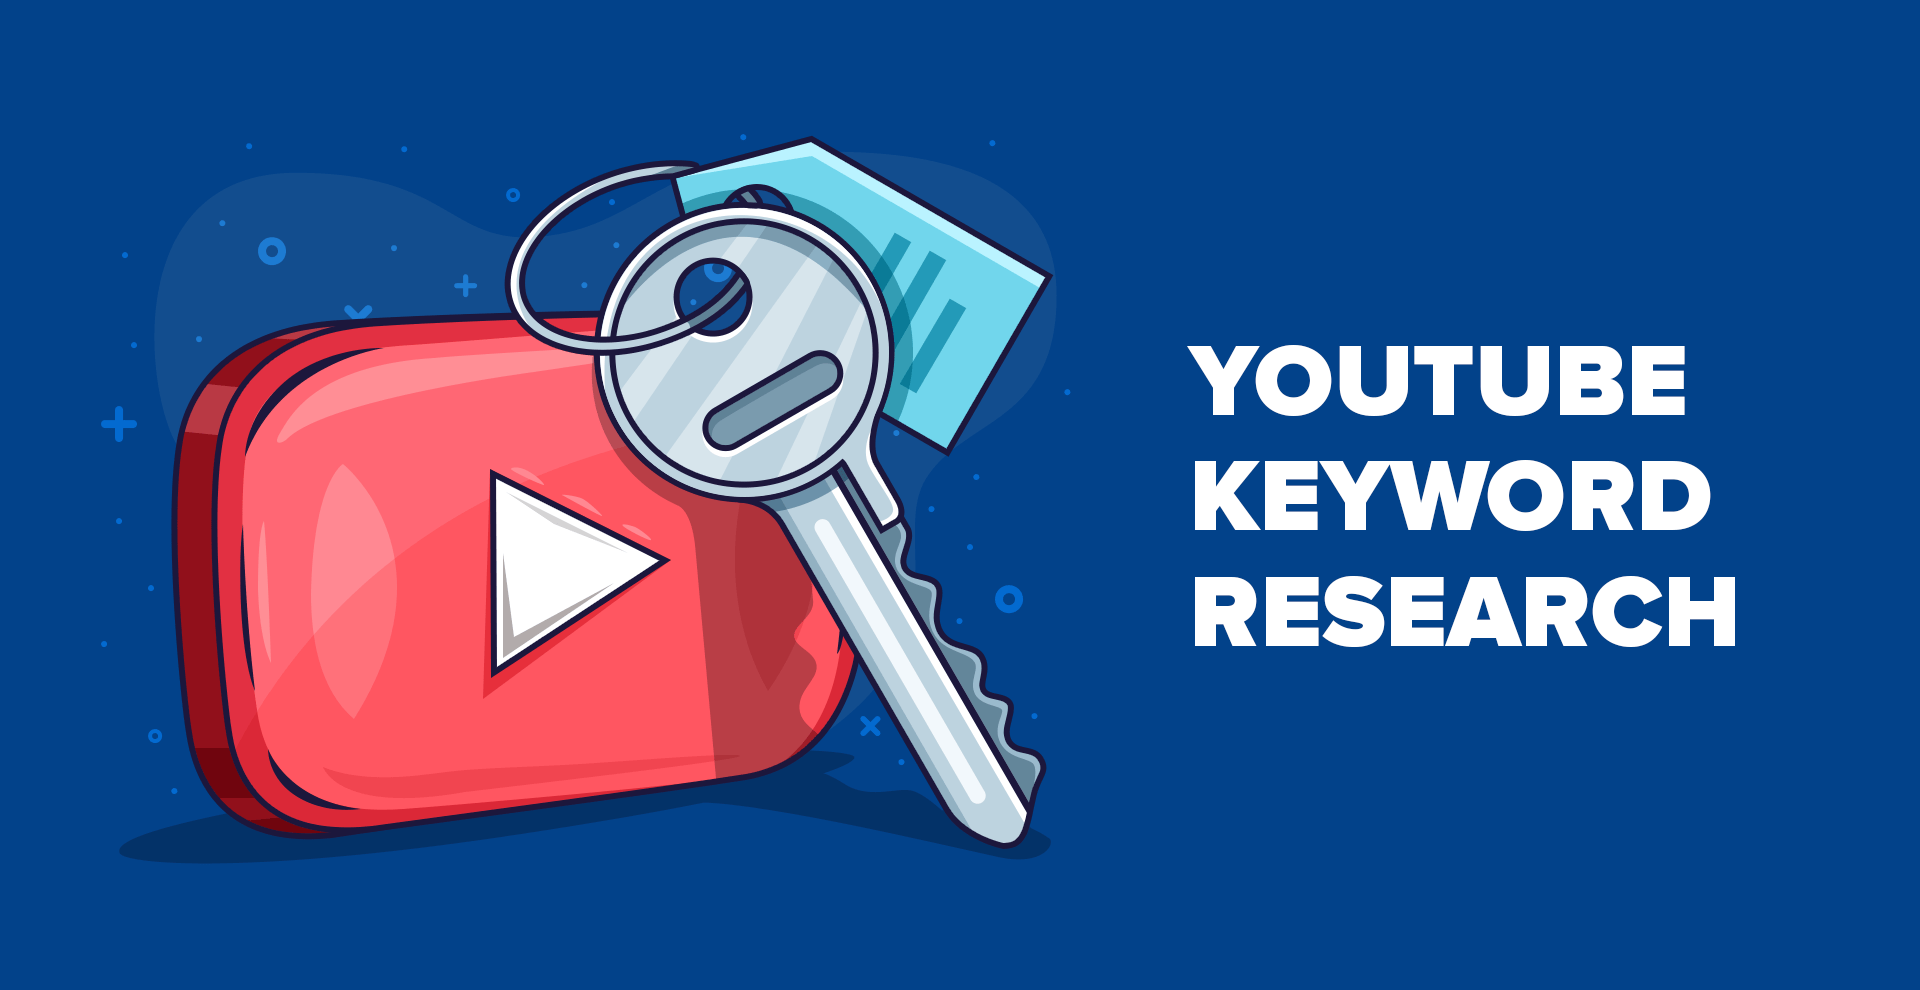 research question about youtube